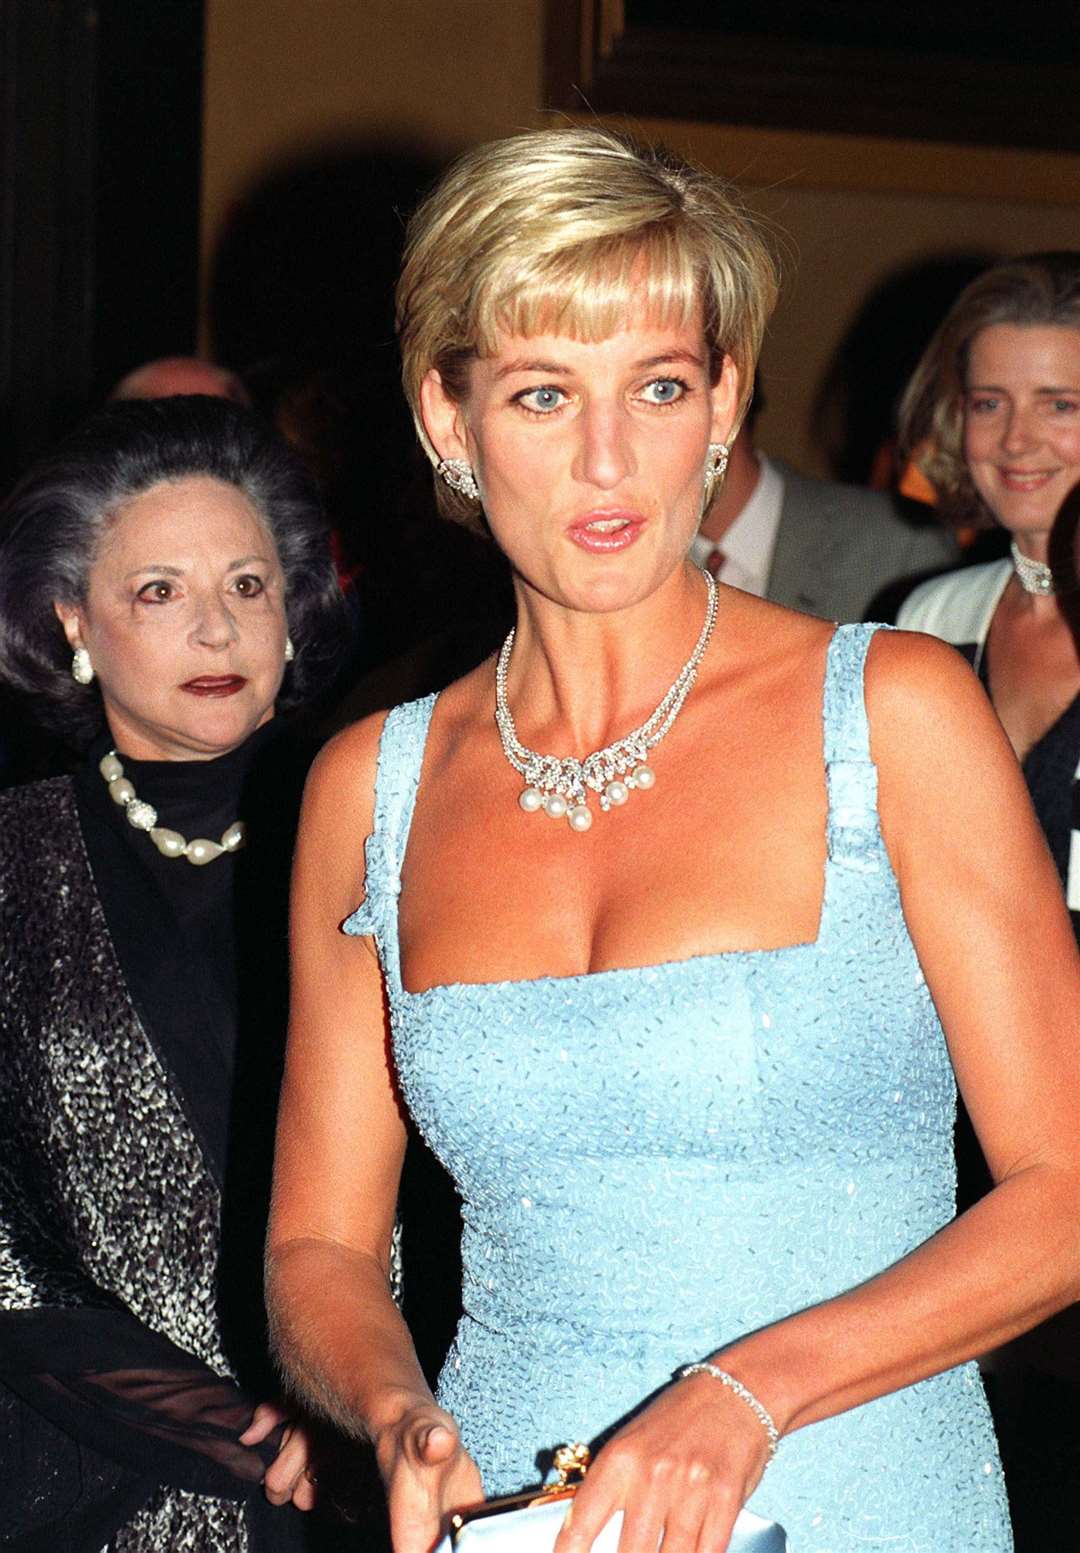 Diana, Princess of Wales, arriving at the Royal Albert Hall, London, for a gala performance of Swan Lake by the English National Ballet (John Stillwell/PA)